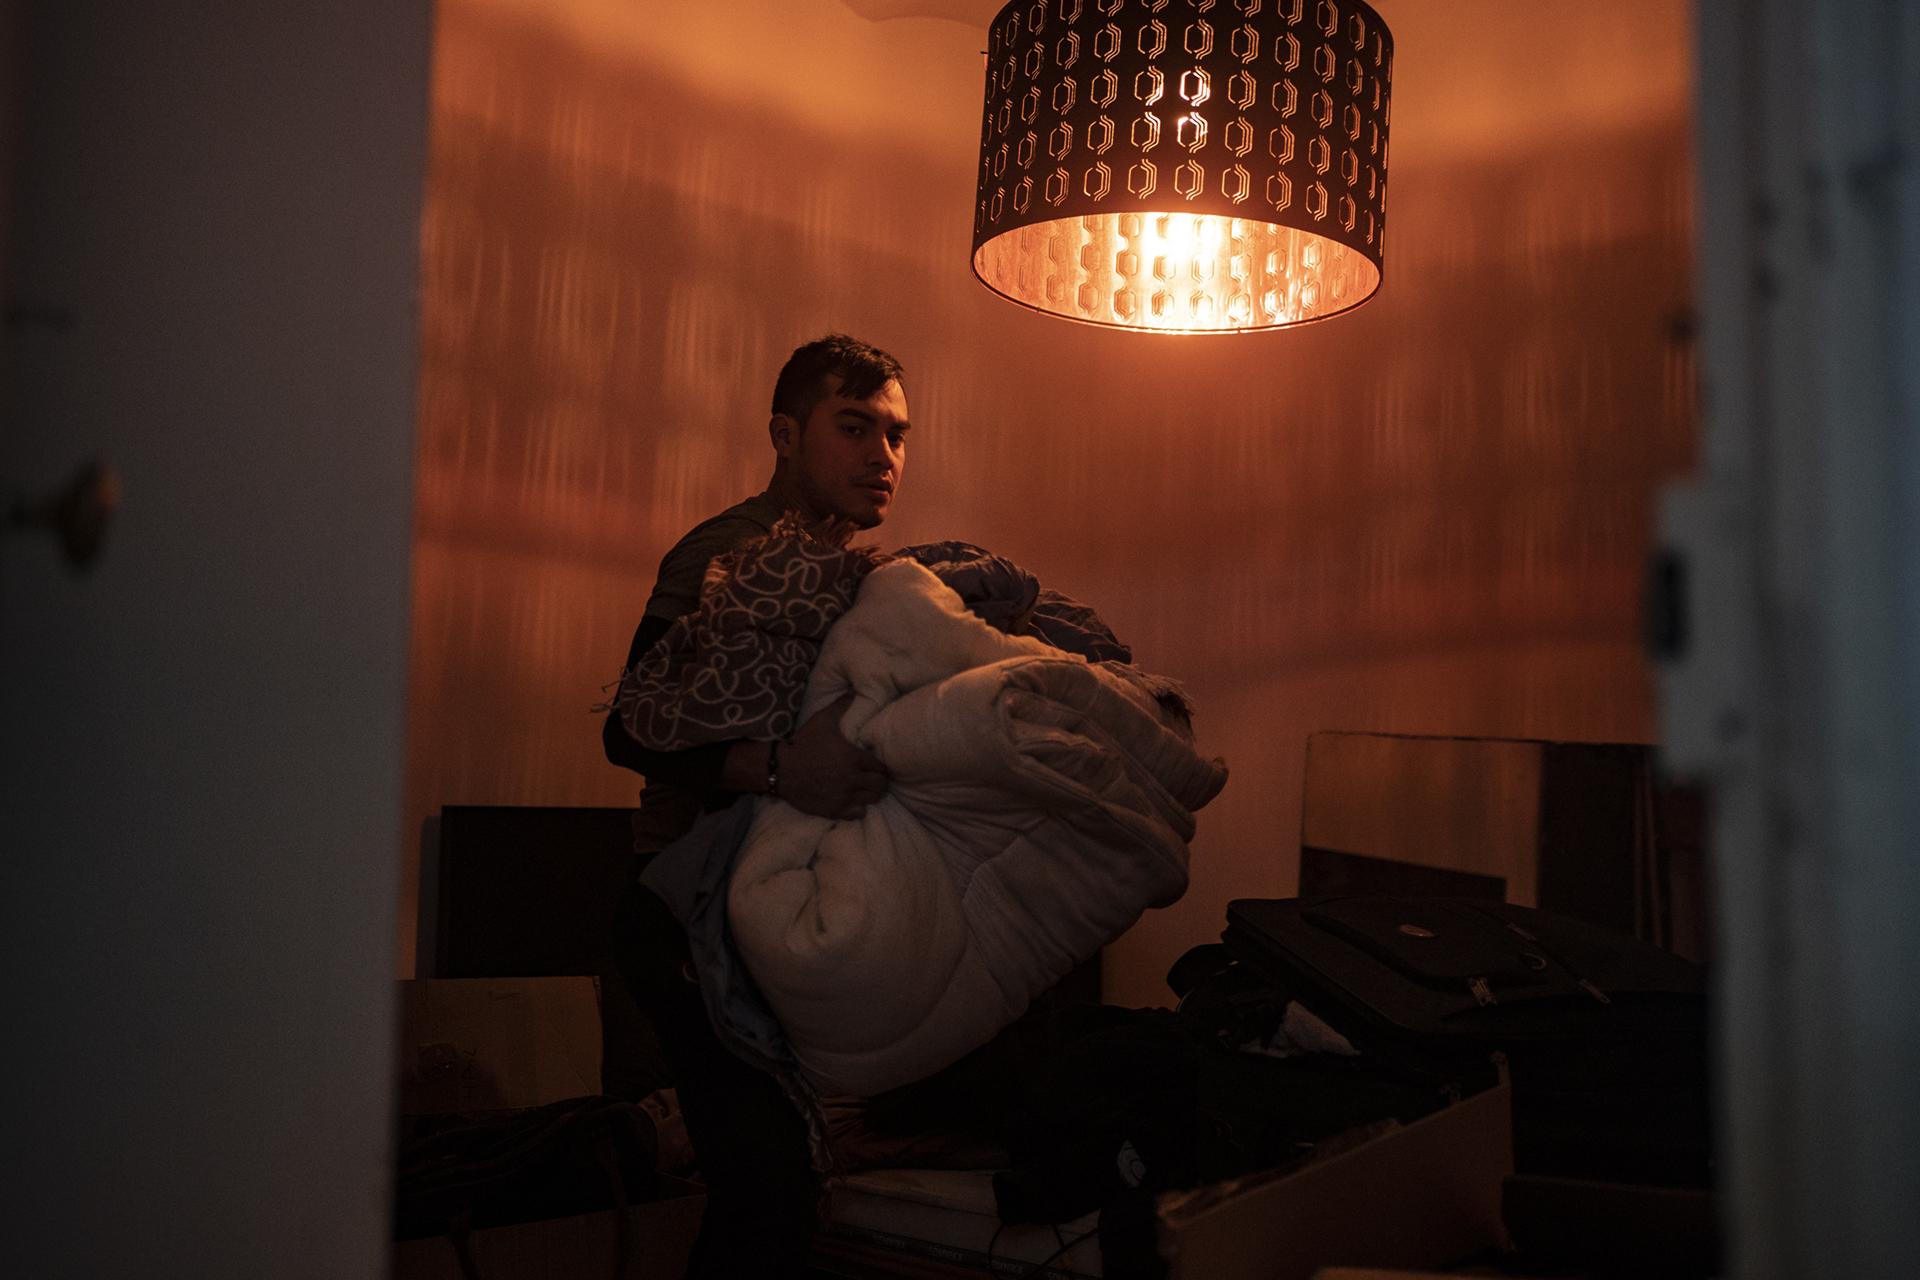  Alejandro IbanÌƒez, 30, collects his belonging from his apartment during the eviction from his apartment in Barcelona, Spain, Thursday, Dec.10, 2020. Alejandro has been accused of not making rent payments and not renewing his lease since February of 2020. Has vulnerable status and works as a delivery rider. (AP Photo/Joan Mateu) &nbsp; &nbsp; &nbsp; &nbsp; &nbsp; &nbsp; &nbsp; &nbsp; &nbsp; &nbsp; &nbsp; &nbsp; &nbsp; &nbsp; &nbsp; &nbsp; &nbsp; &nbsp; 